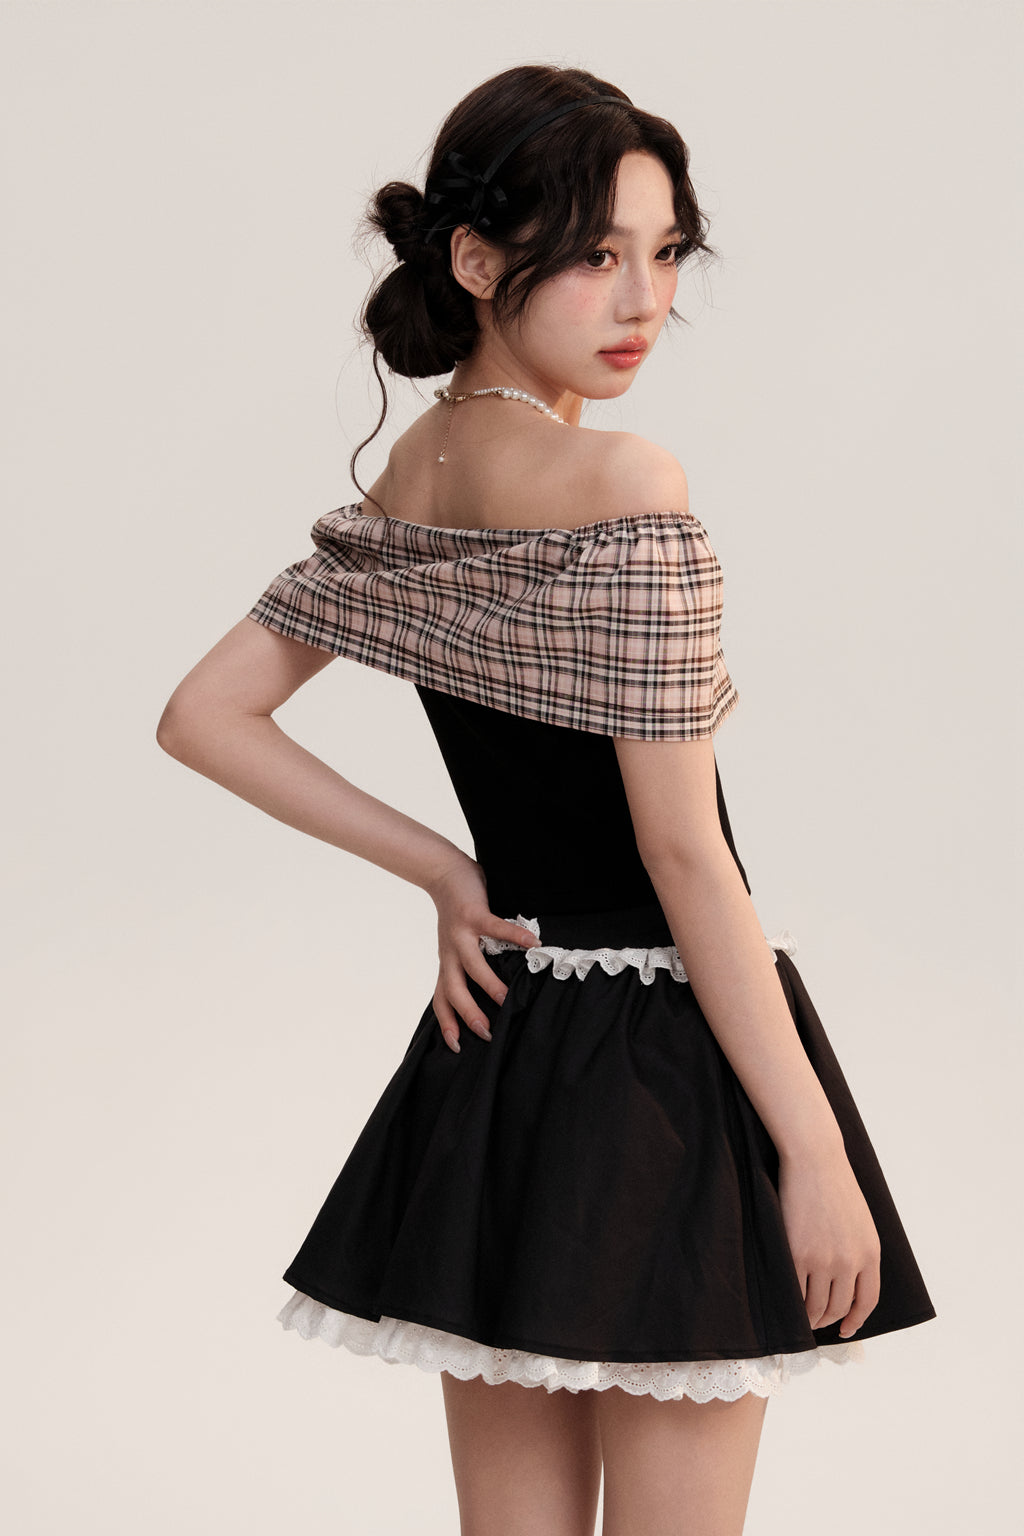 One-shoulder Spliced Shirt/Lace Skirt AOO0007